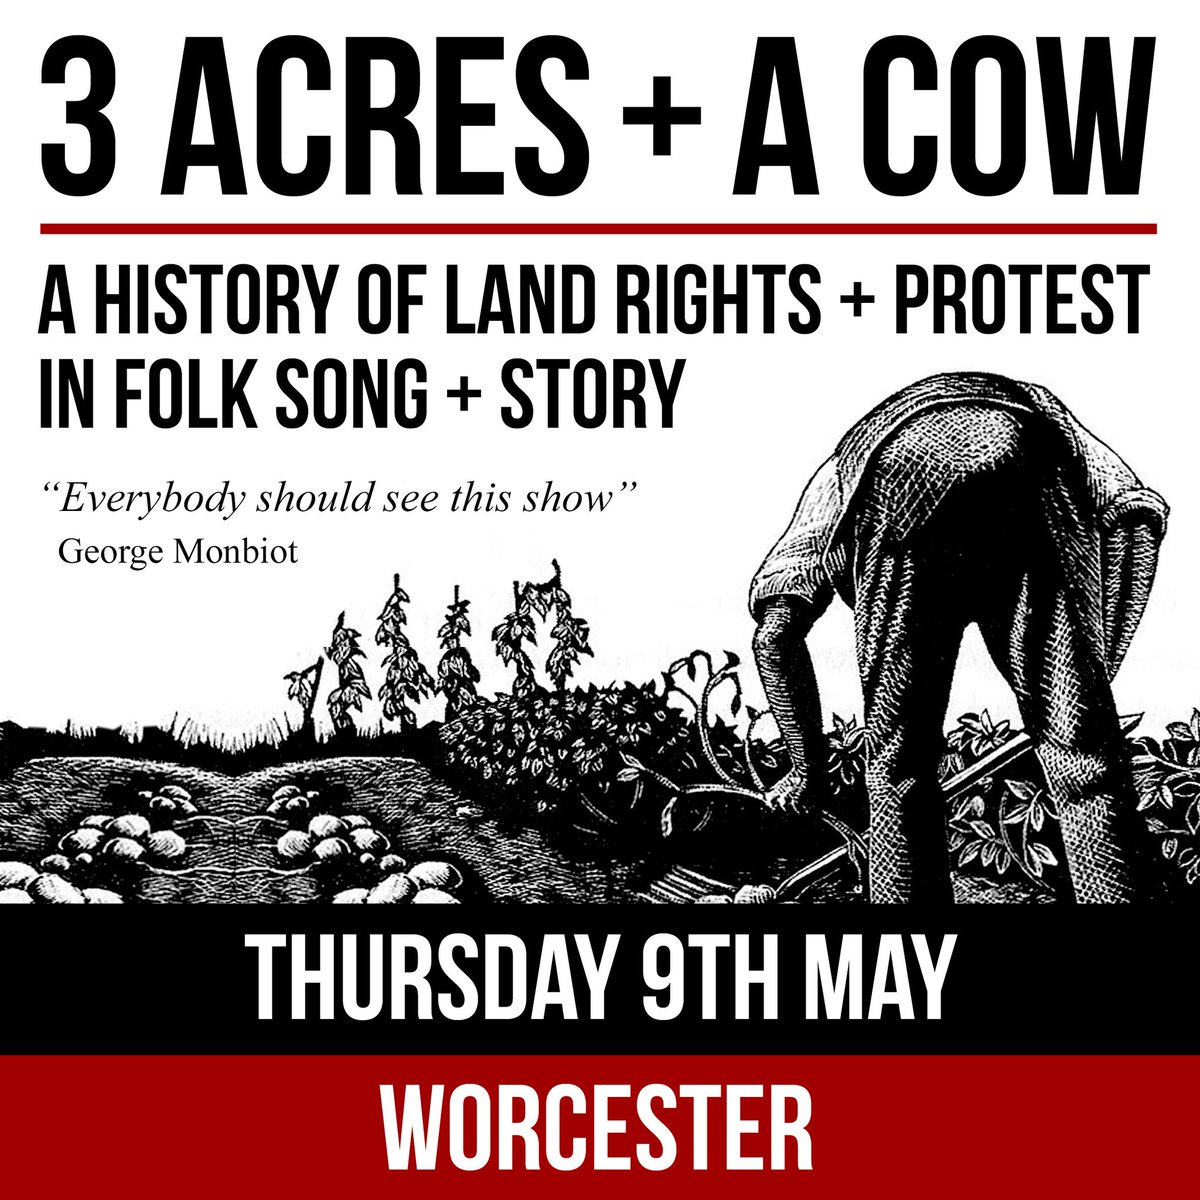 I loved this so much that I reached out to @ThreeAcresACow to bring it to Worcester & here it is at the lovely @WorcsStSwithuns 9th May Get your tickets soon tickettailor.com/events/modifyt…